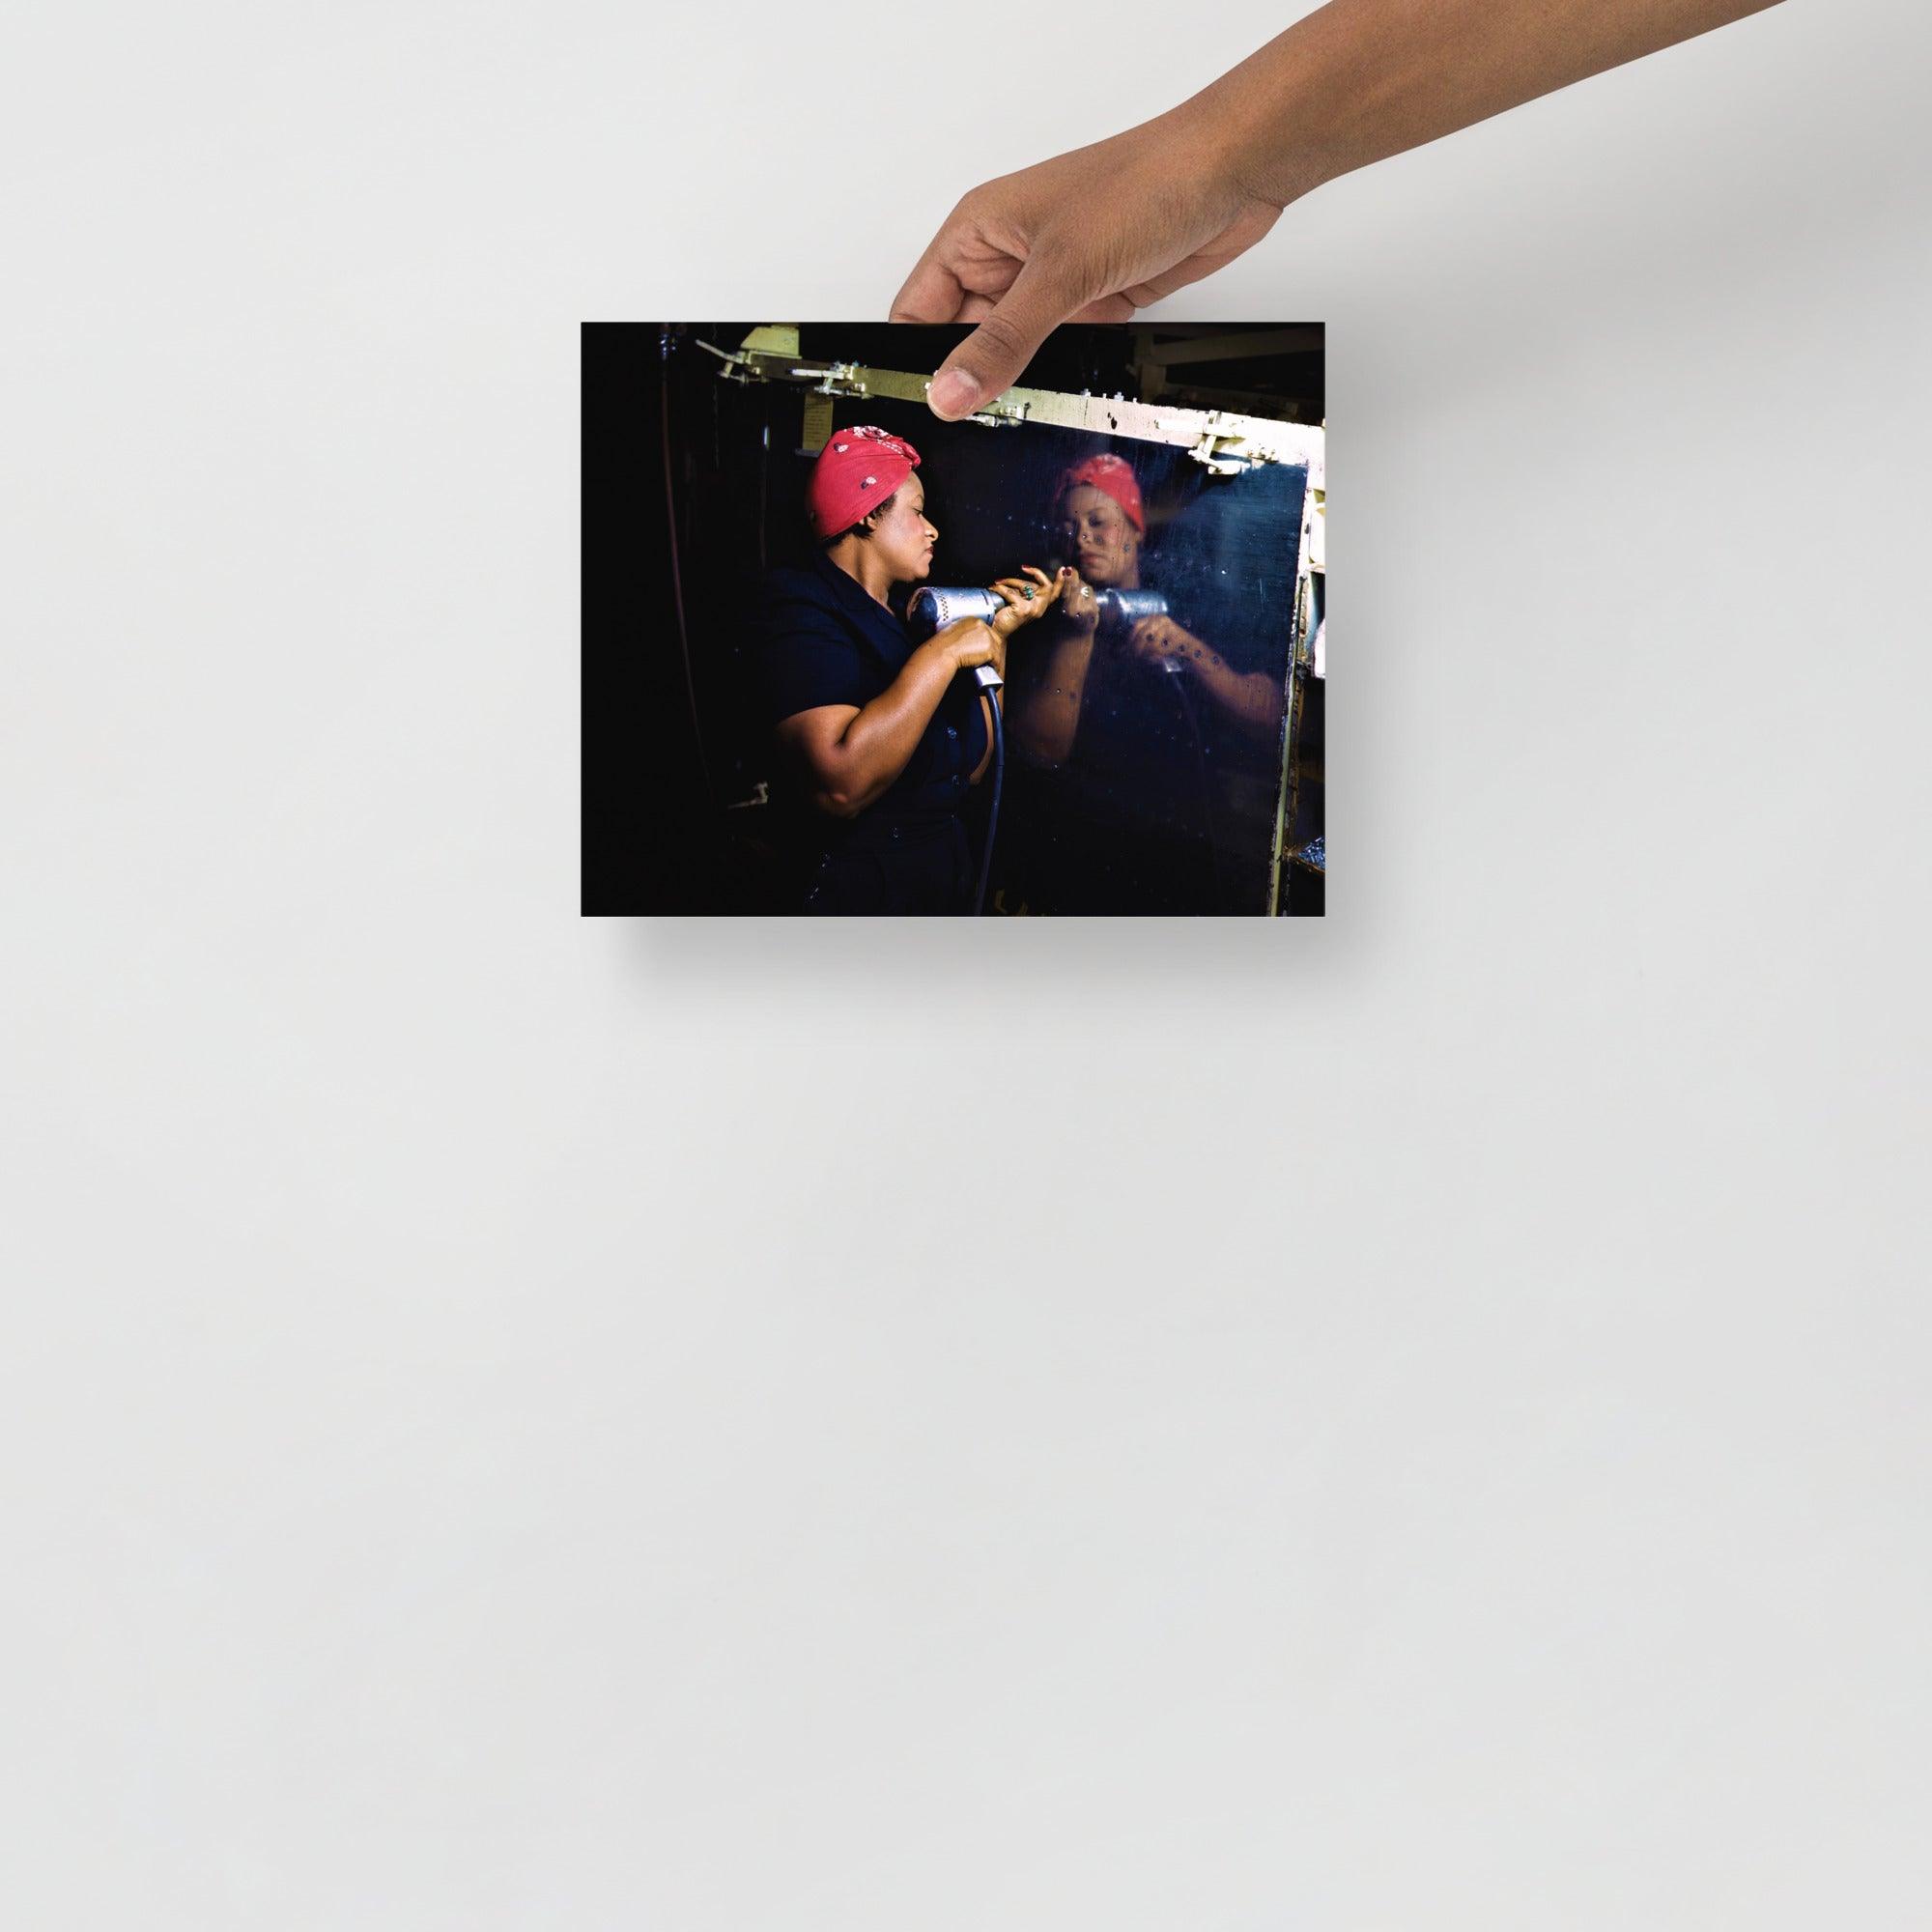 A Rosie the Riveter poster on a plain backdrop in size 8x10”.